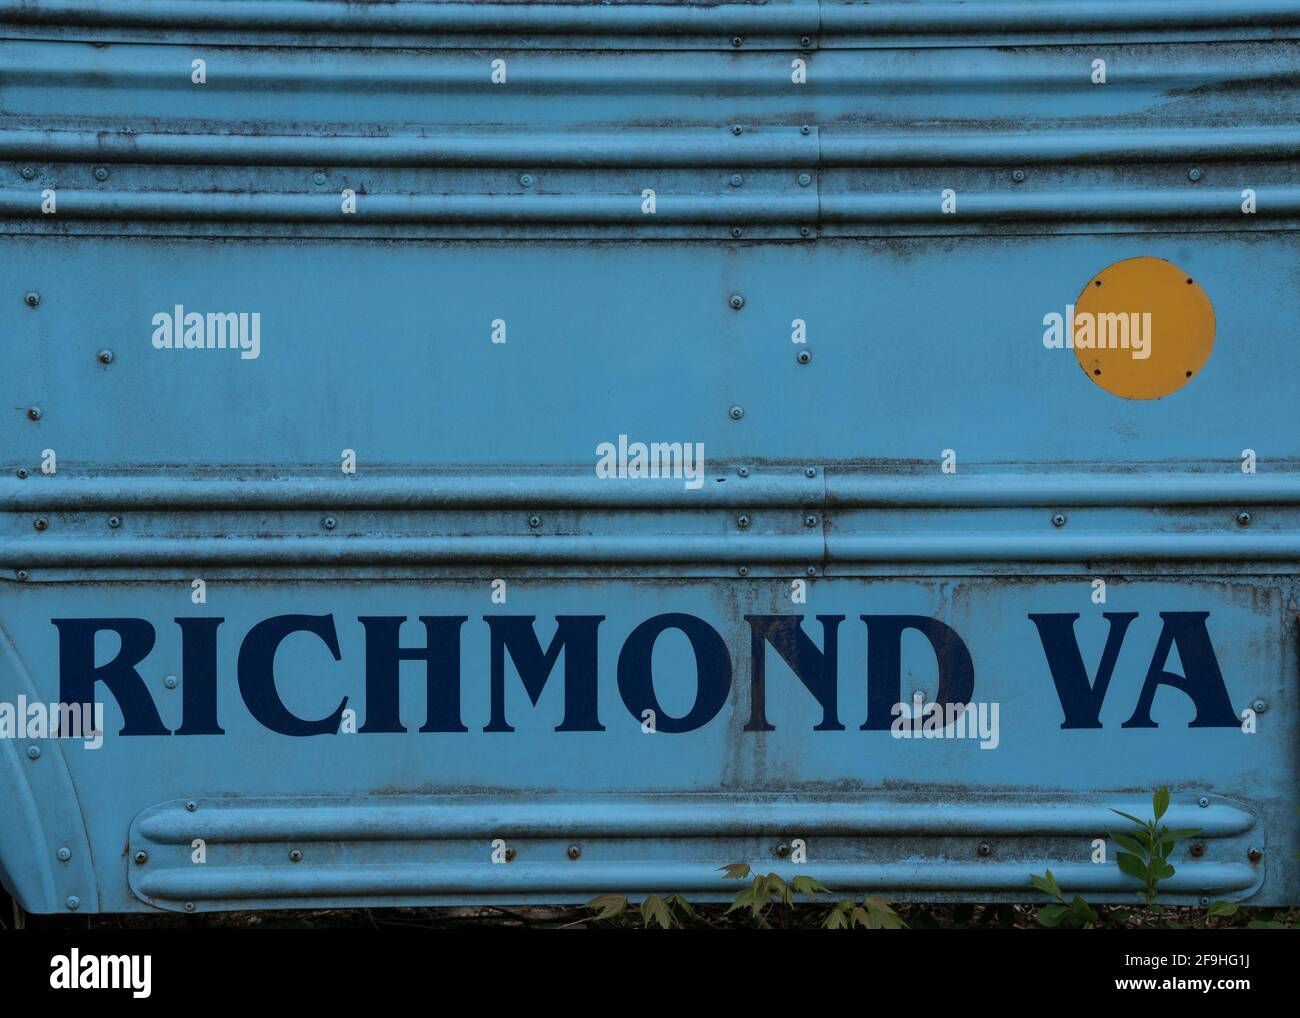 Richmond, VA graphic on abandoned, rusted bus - blue lettering on blue background with rivets Stock Photo